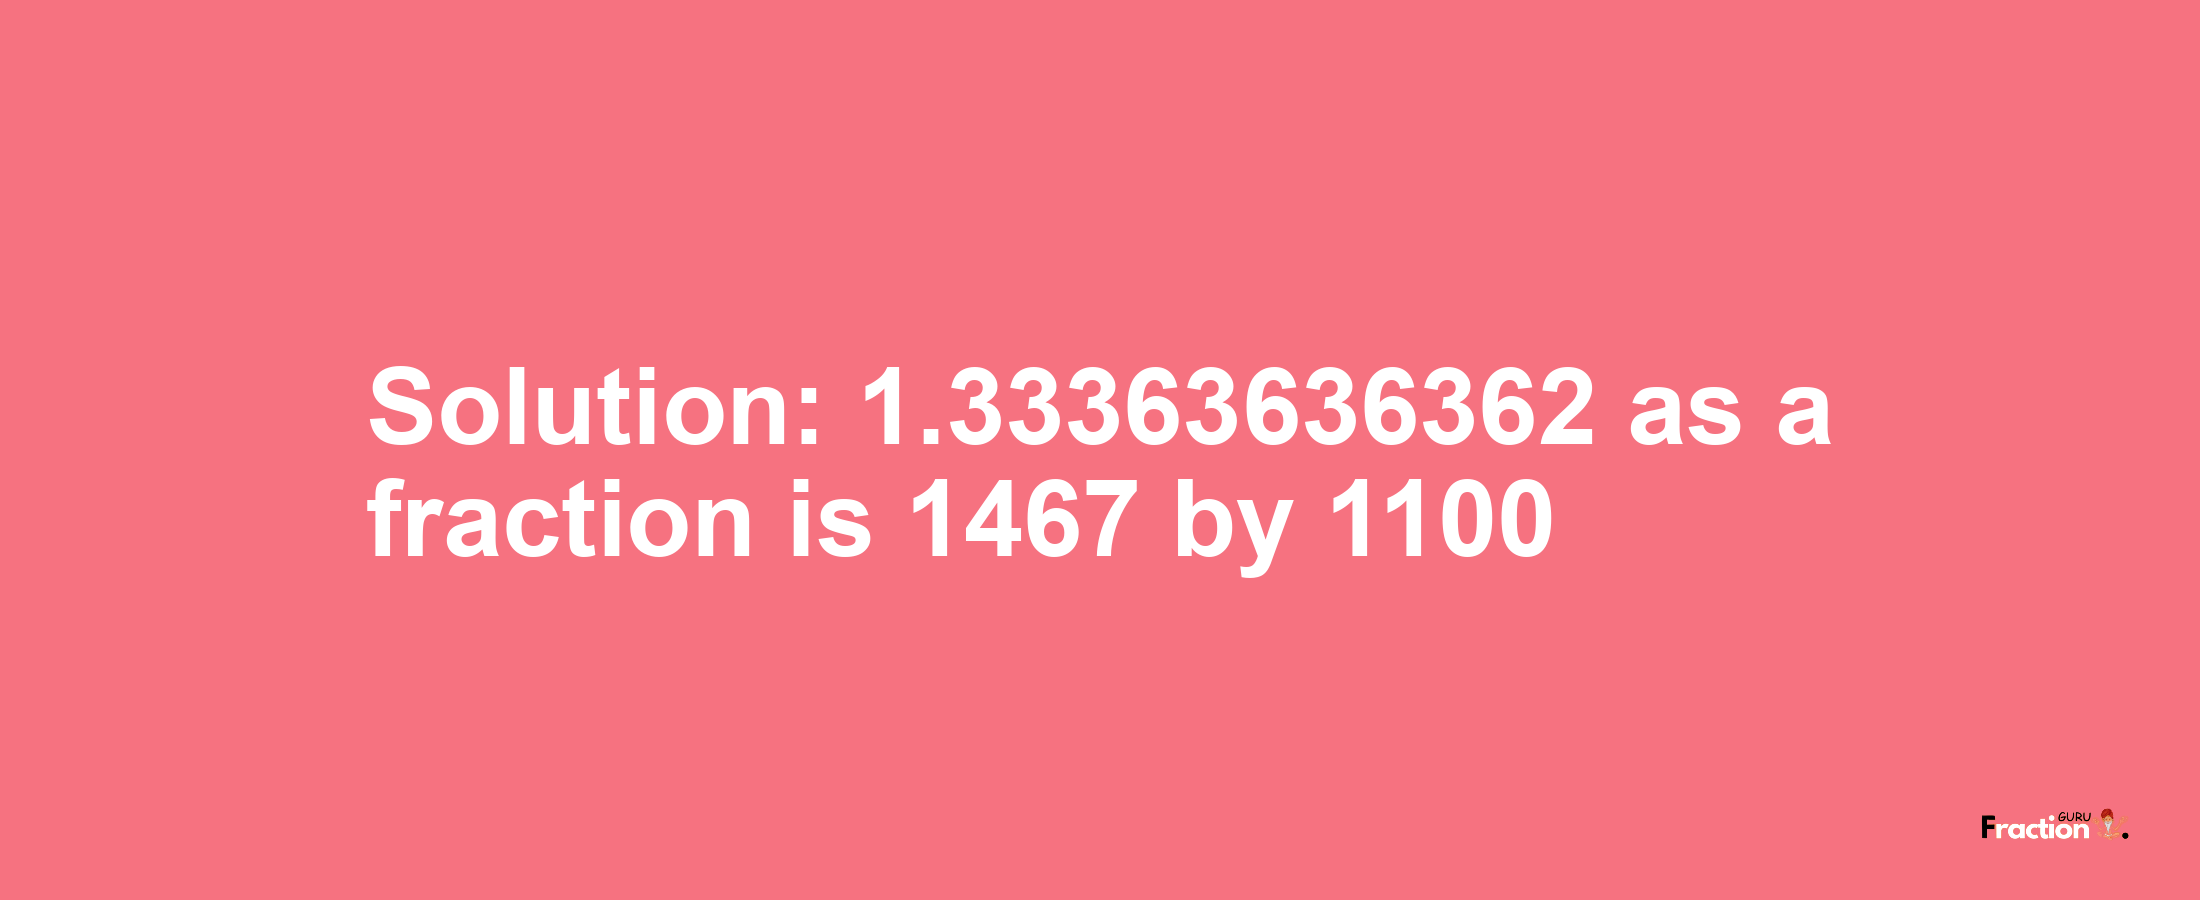 Solution:1.33363636362 as a fraction is 1467/1100